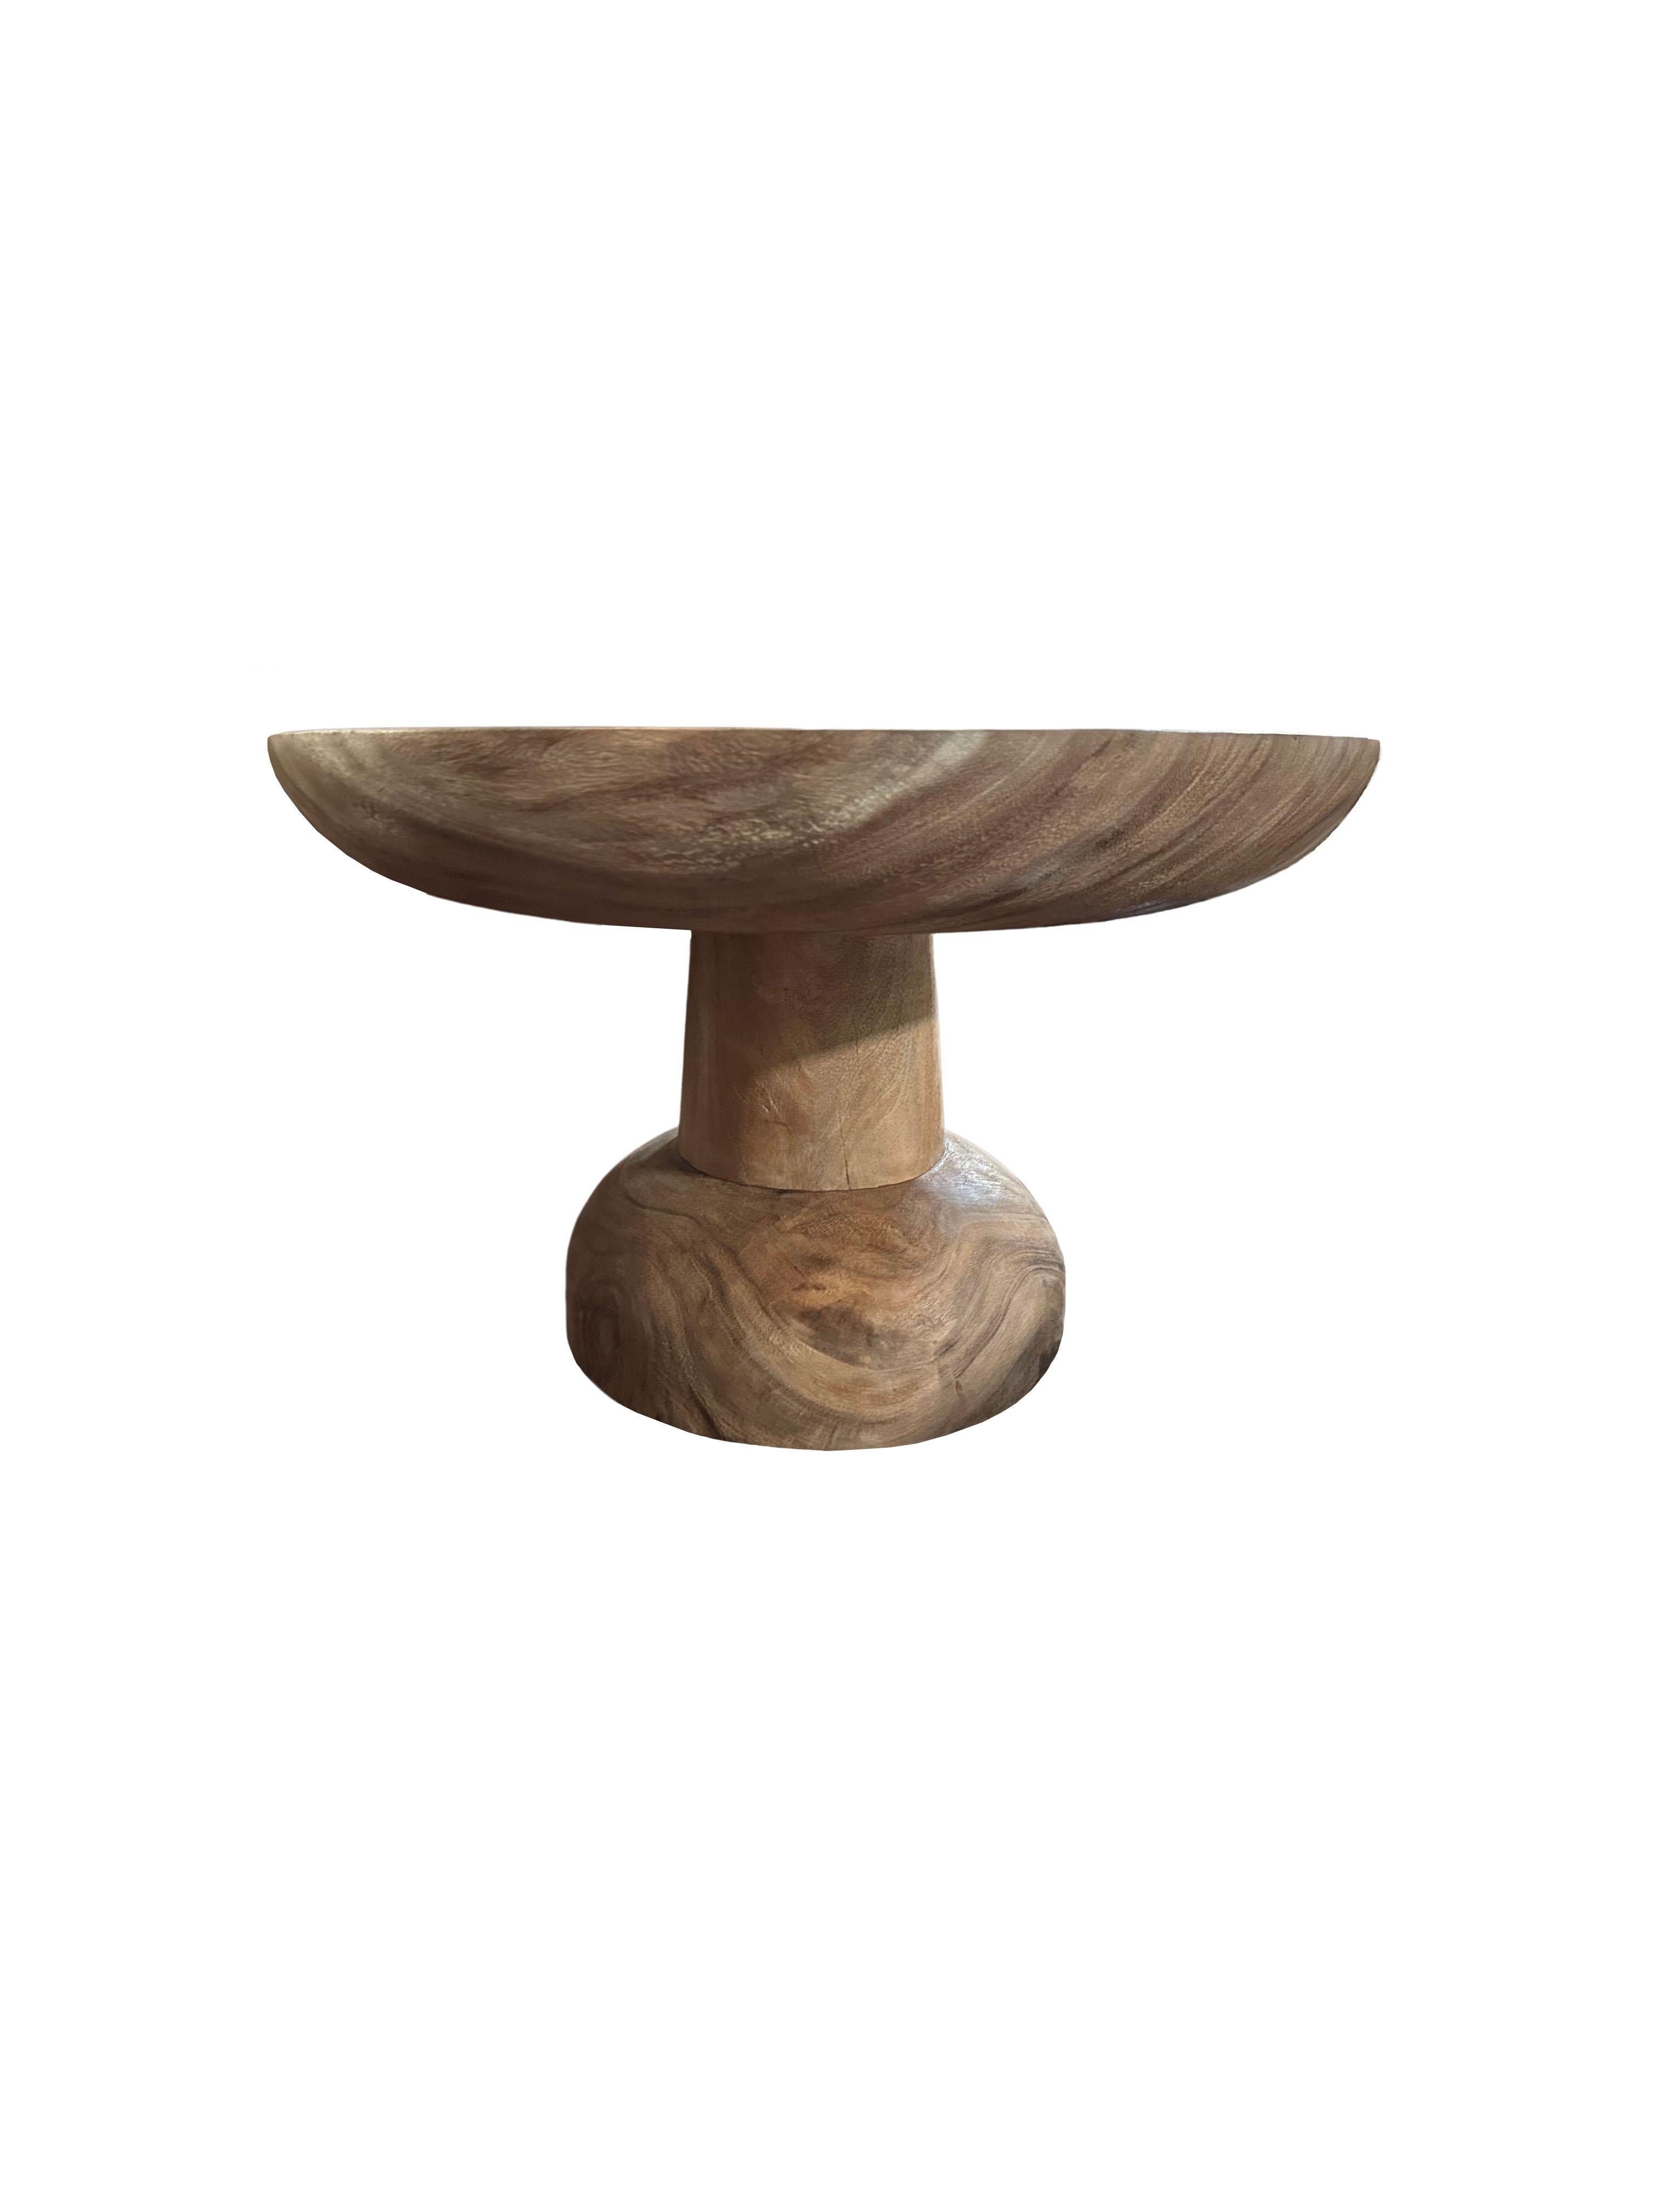 Indonesian Sculptural Round Table Suar Wood, Modern Organic For Sale